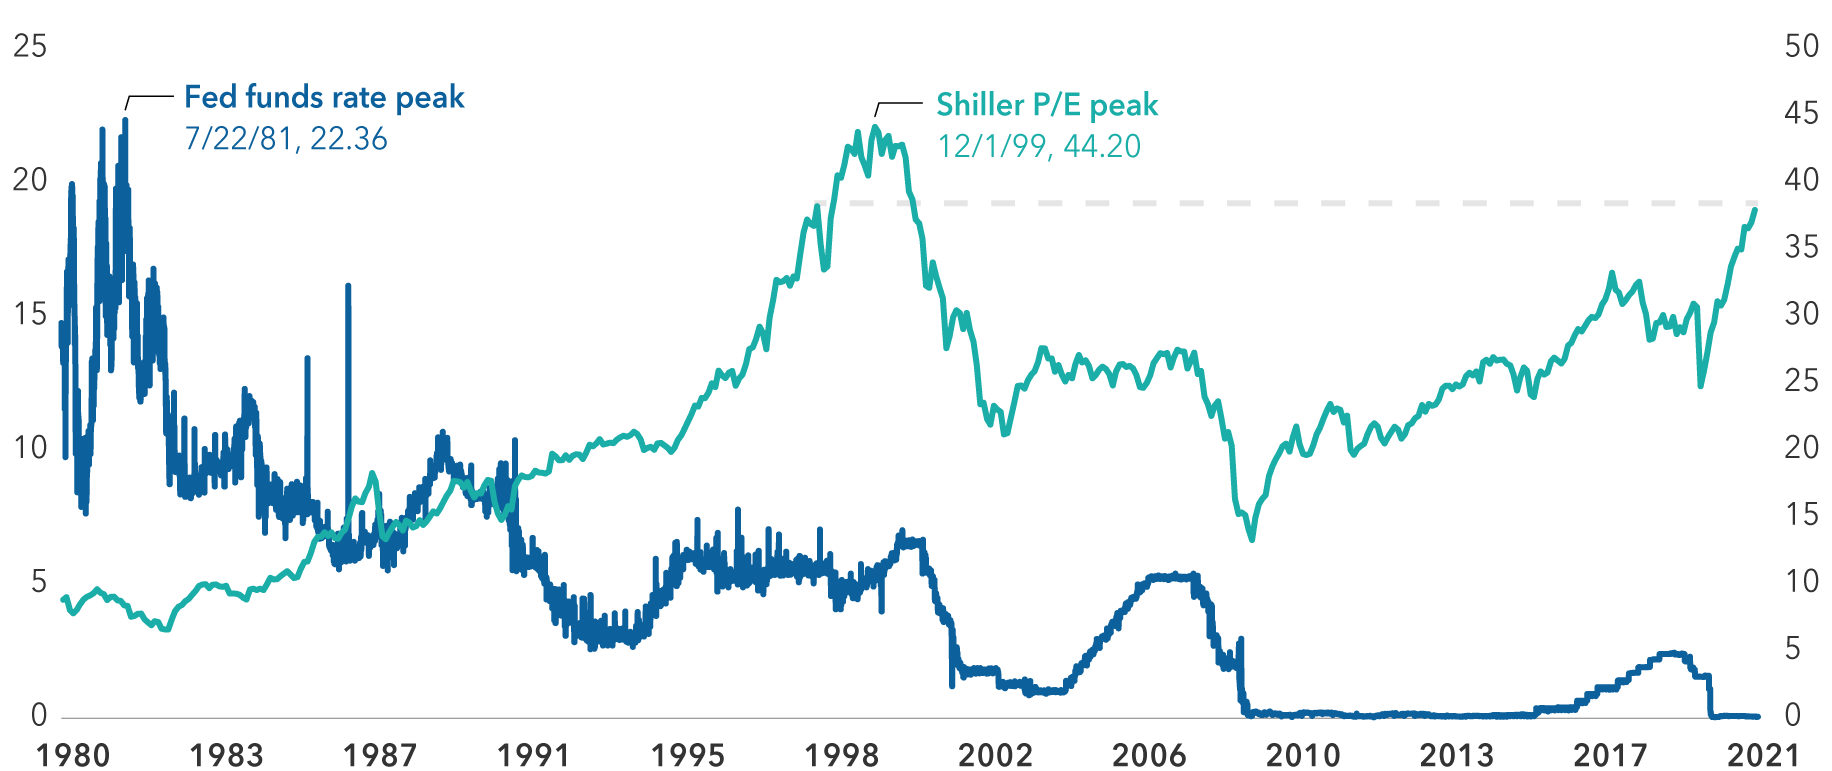 A line chart showing daily observations of the effective federal funds rate and monthly observations of the Shiller P/E ratio from January 1, 1980, through July 1, 2021. The federal funds rate peaked at 22.36 on July 22, 1981, and was at 0.08 on June 30, 2021. The Shiller P/E ratio peaked at 44.20 on December 1, 1999, and was at 37.98 on July 1, 2021, which represents the first month it has been above 37.50 since November 1, 2000.